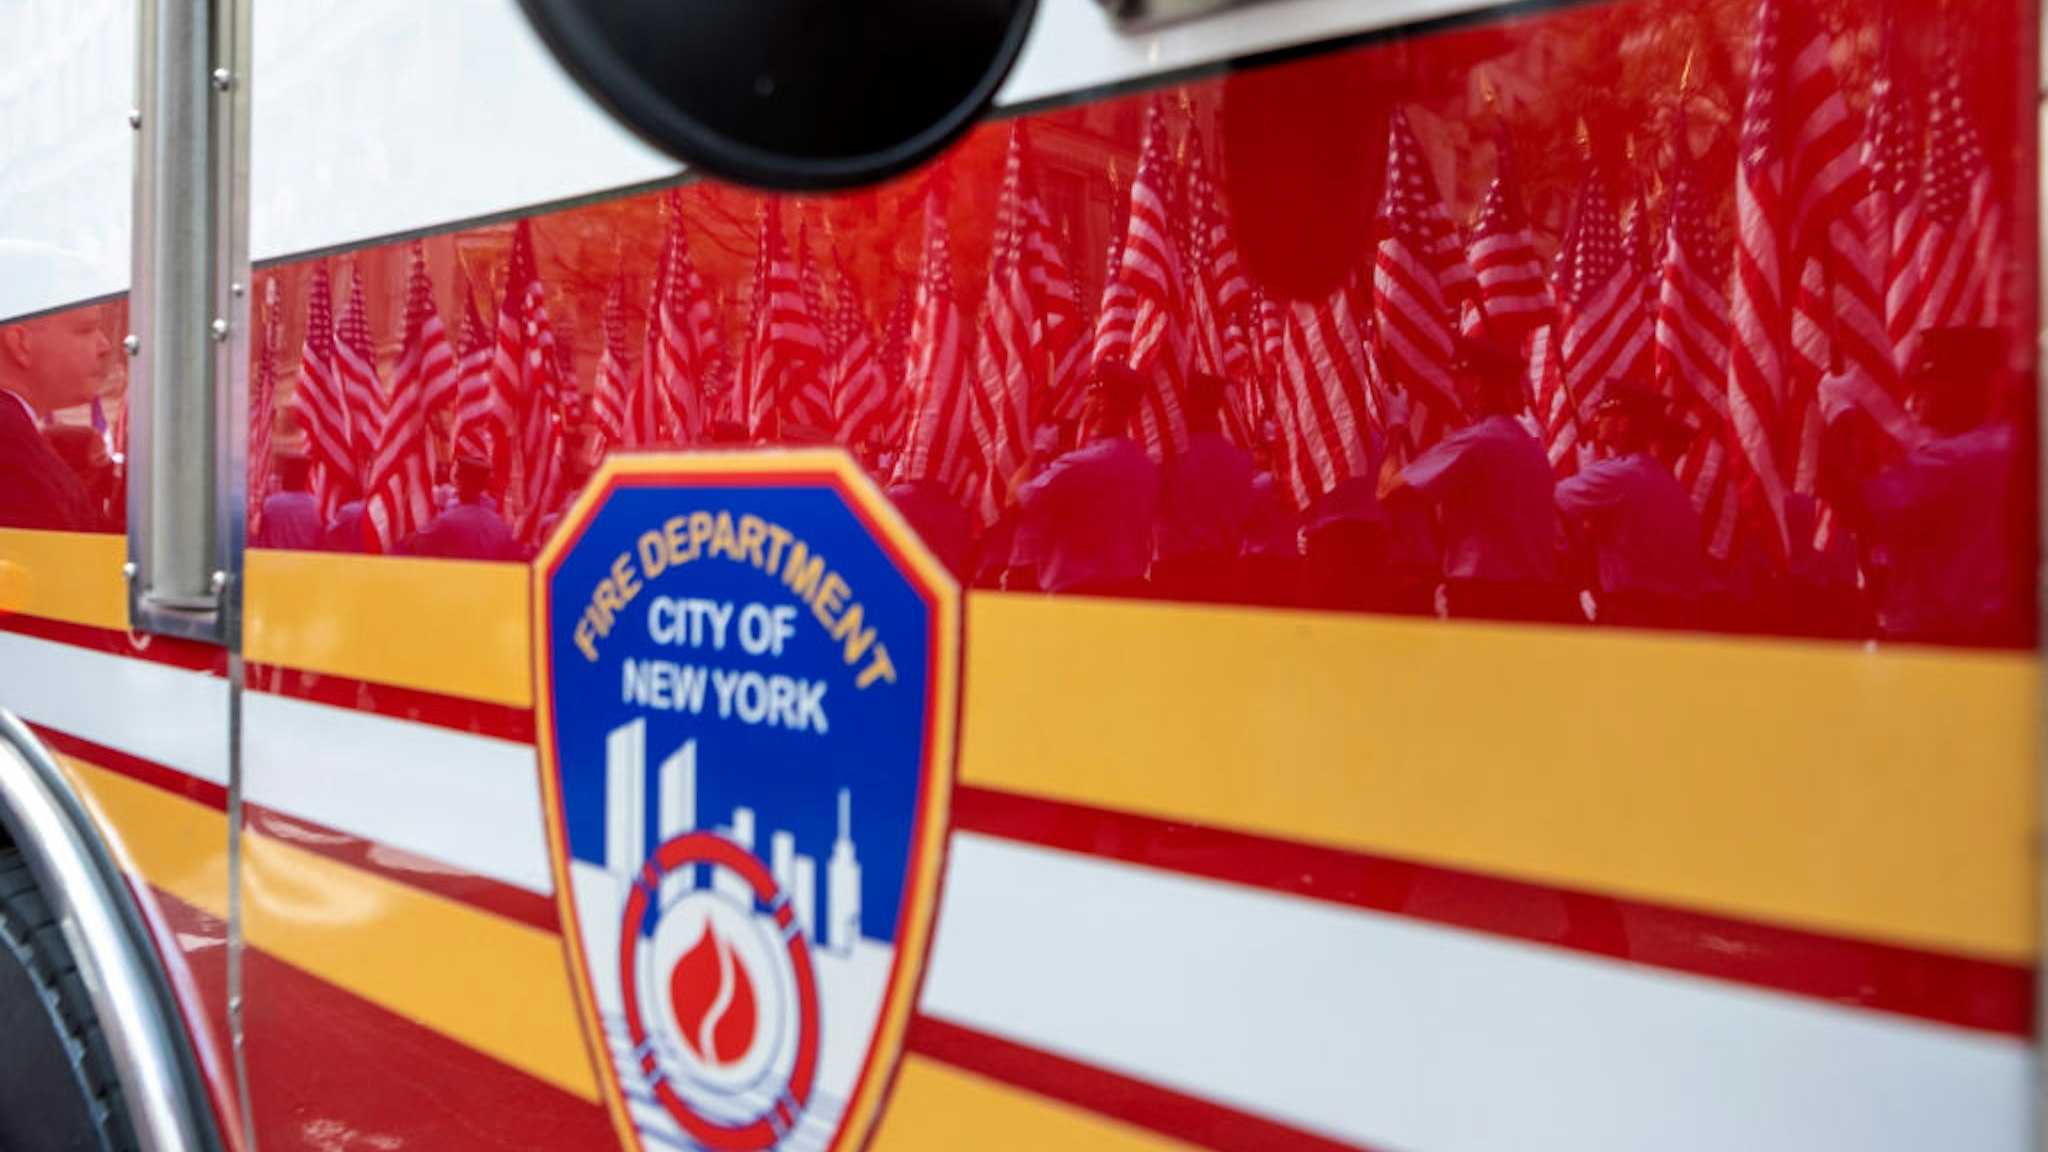 Members of the New York City Fire Department carrying American flags are reflected off a fire truck during a processional during the FDNY Memorial Service at St. Patrick's Cathedral on September 11, 2021 in New York City.